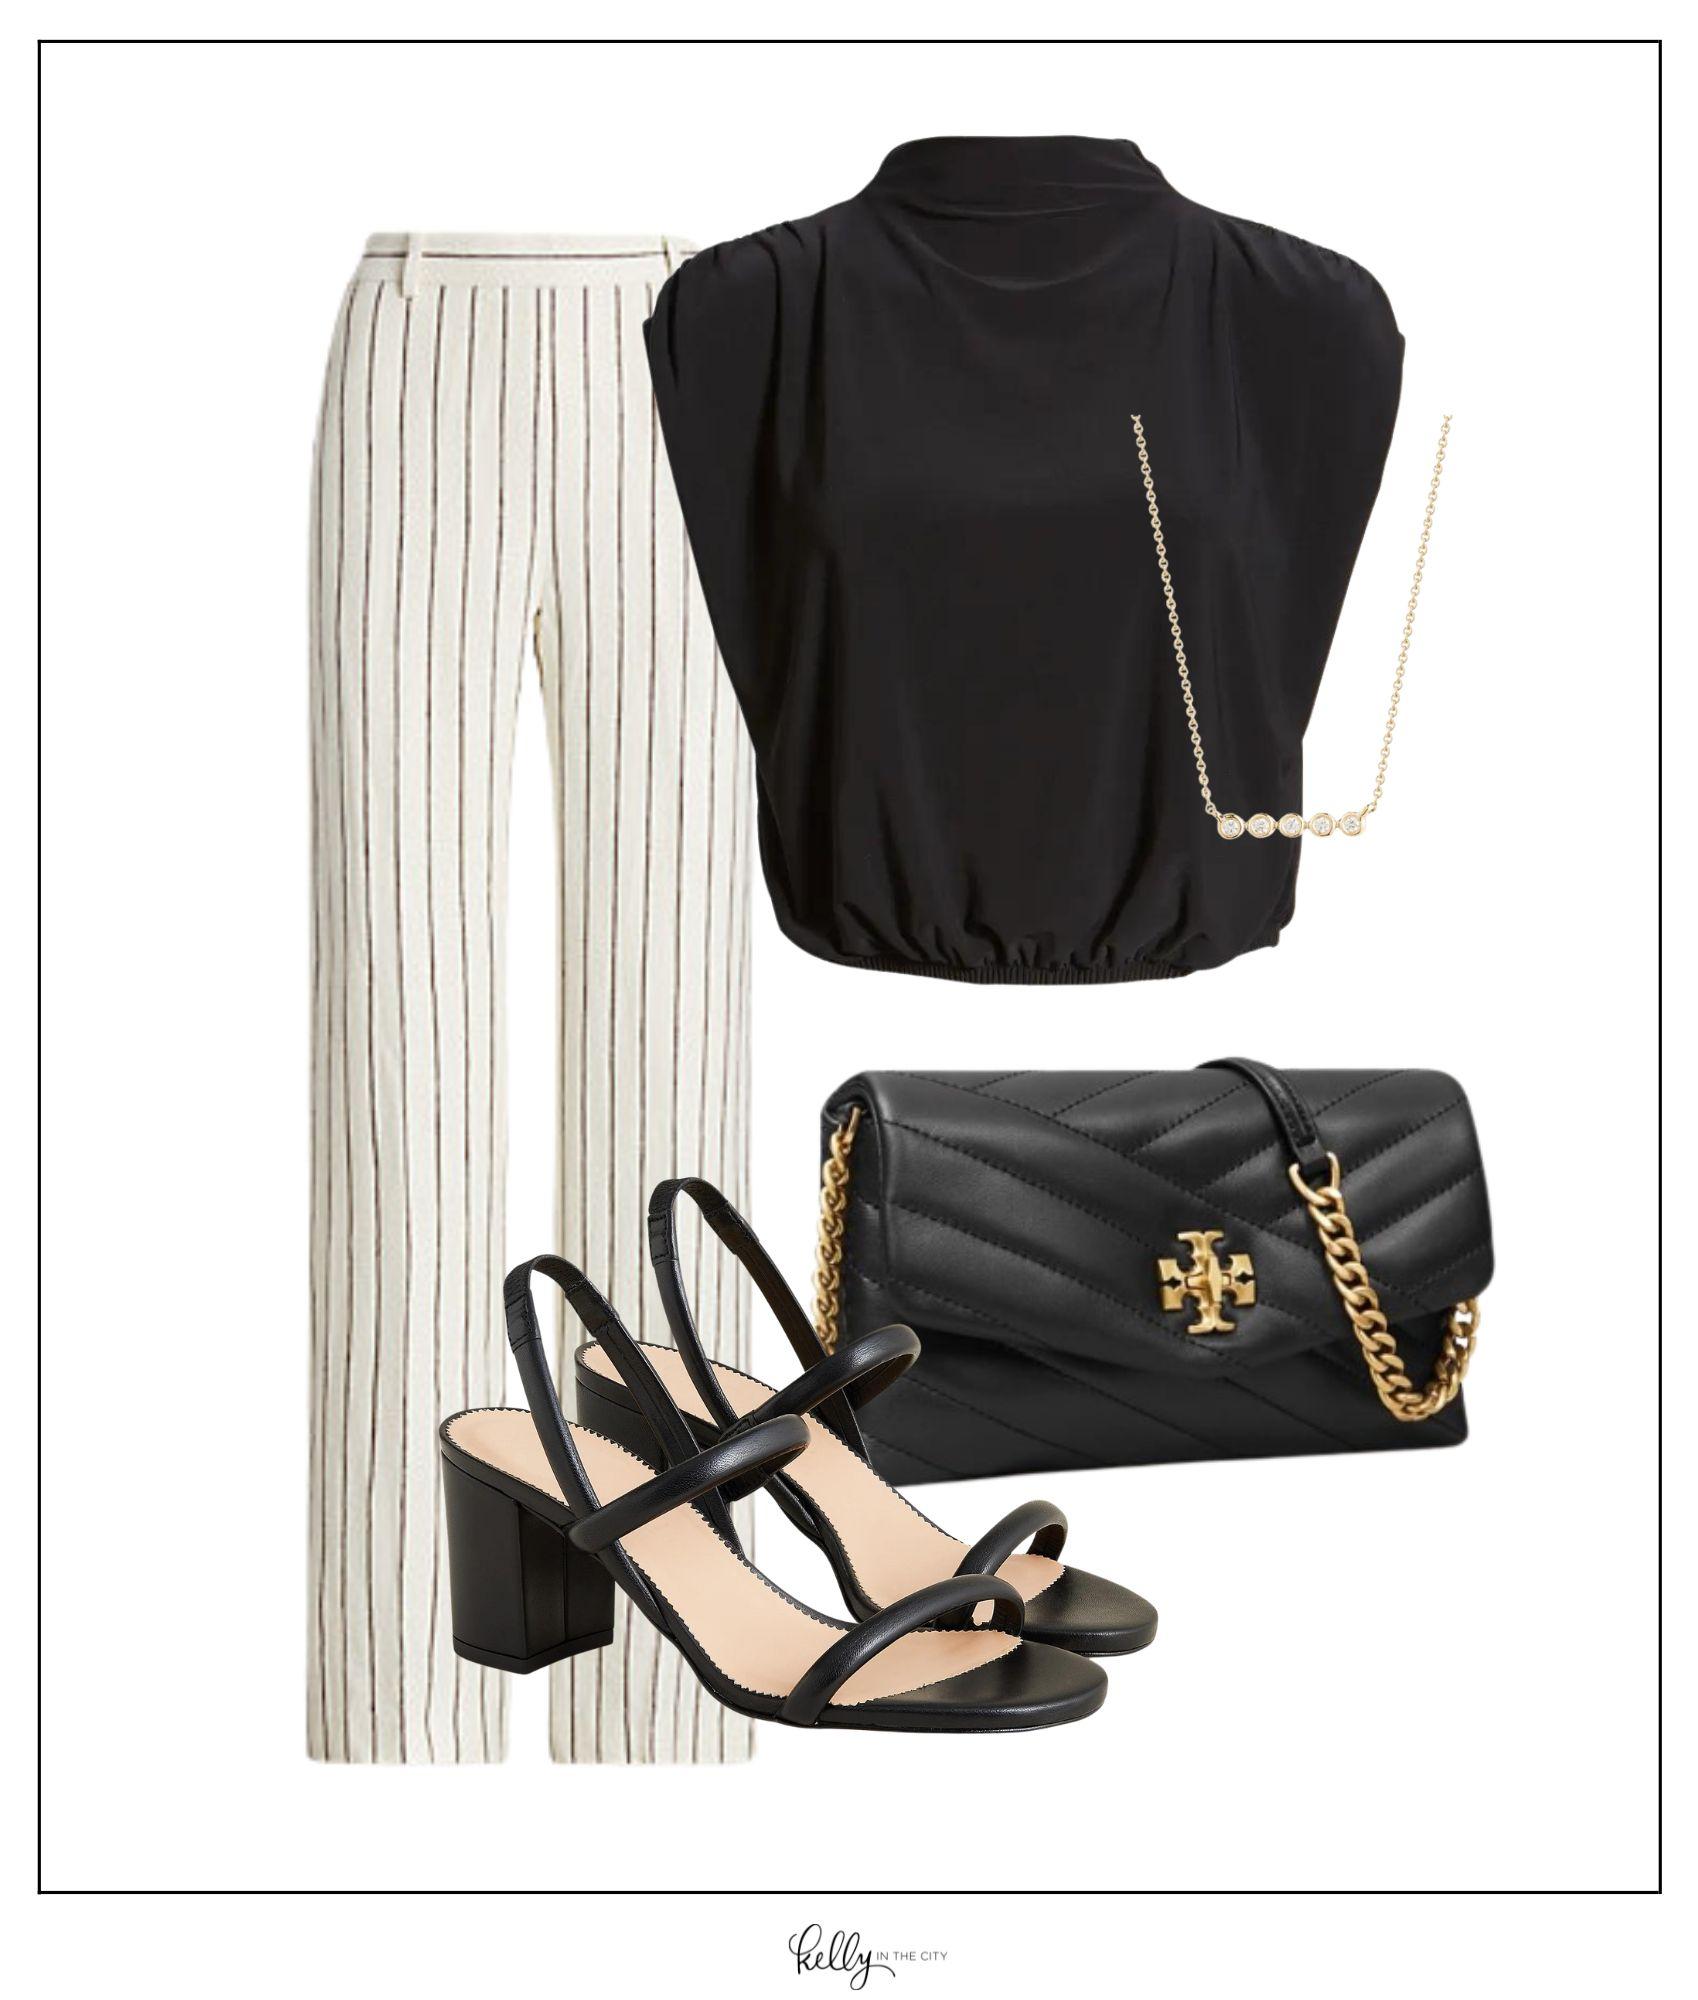 Black and white striped pants outfit